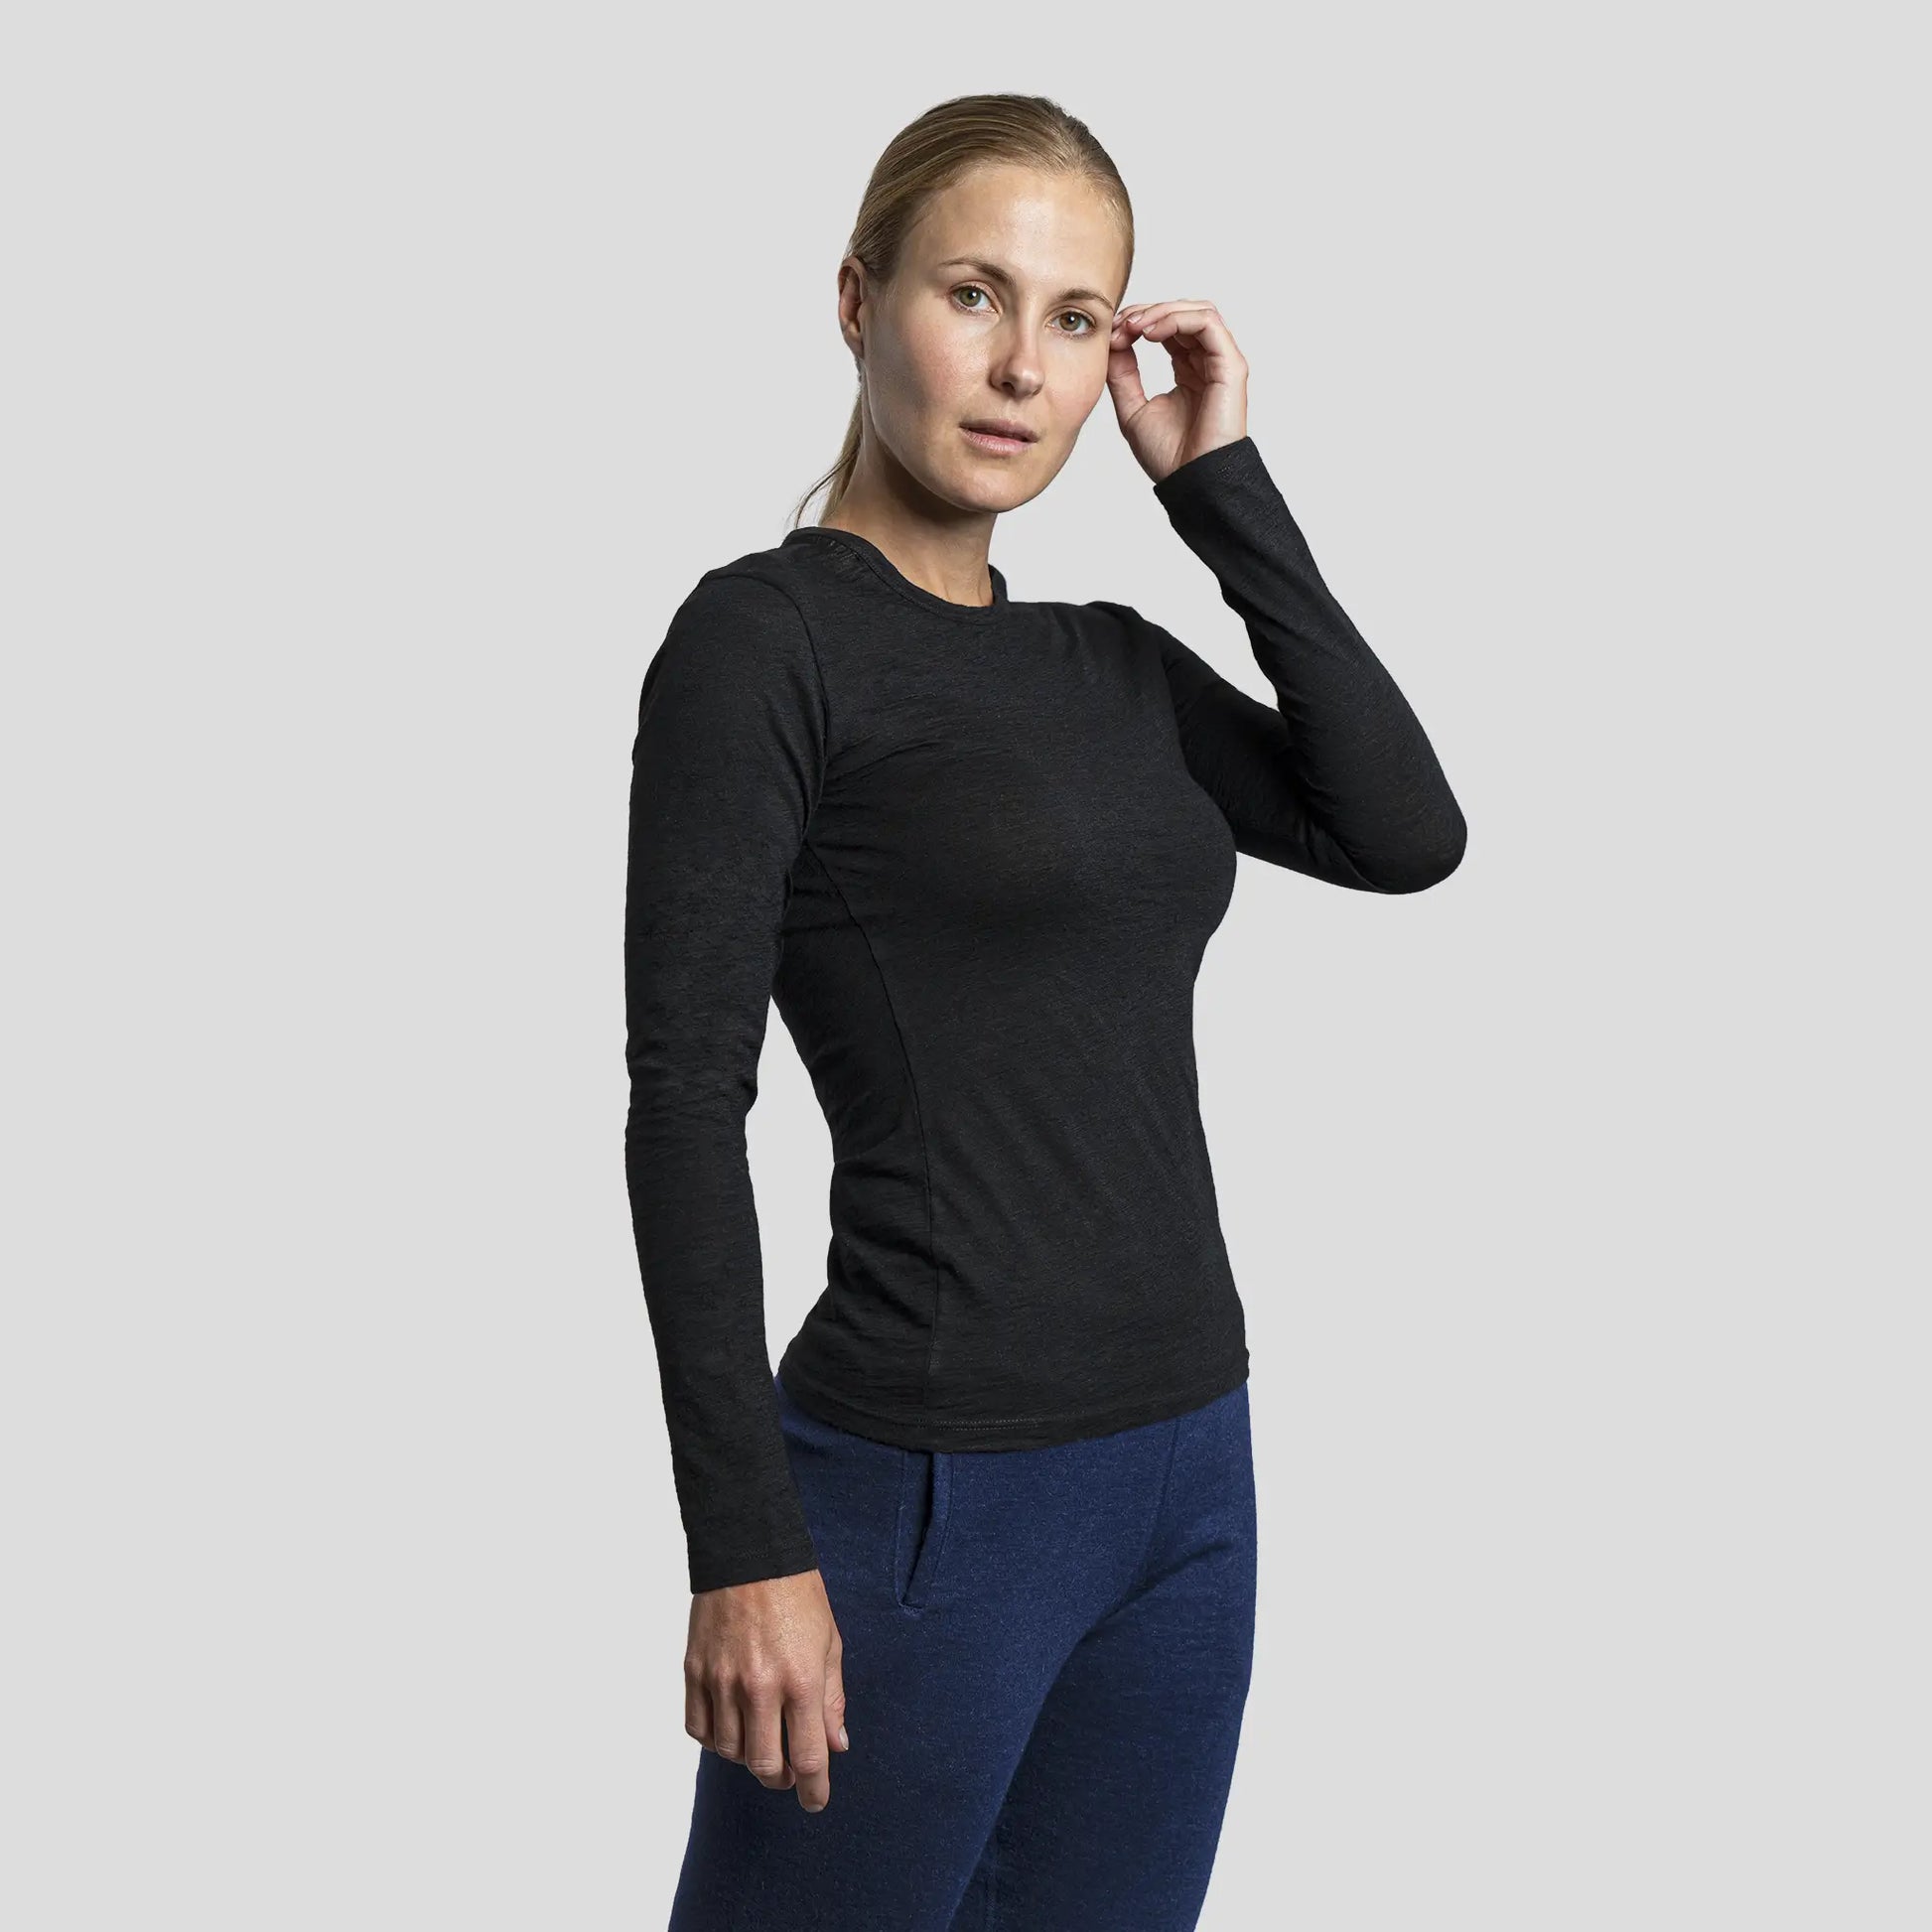 Womens Thermal Underwear With Built In Bra Shirt Long Sleeve Base